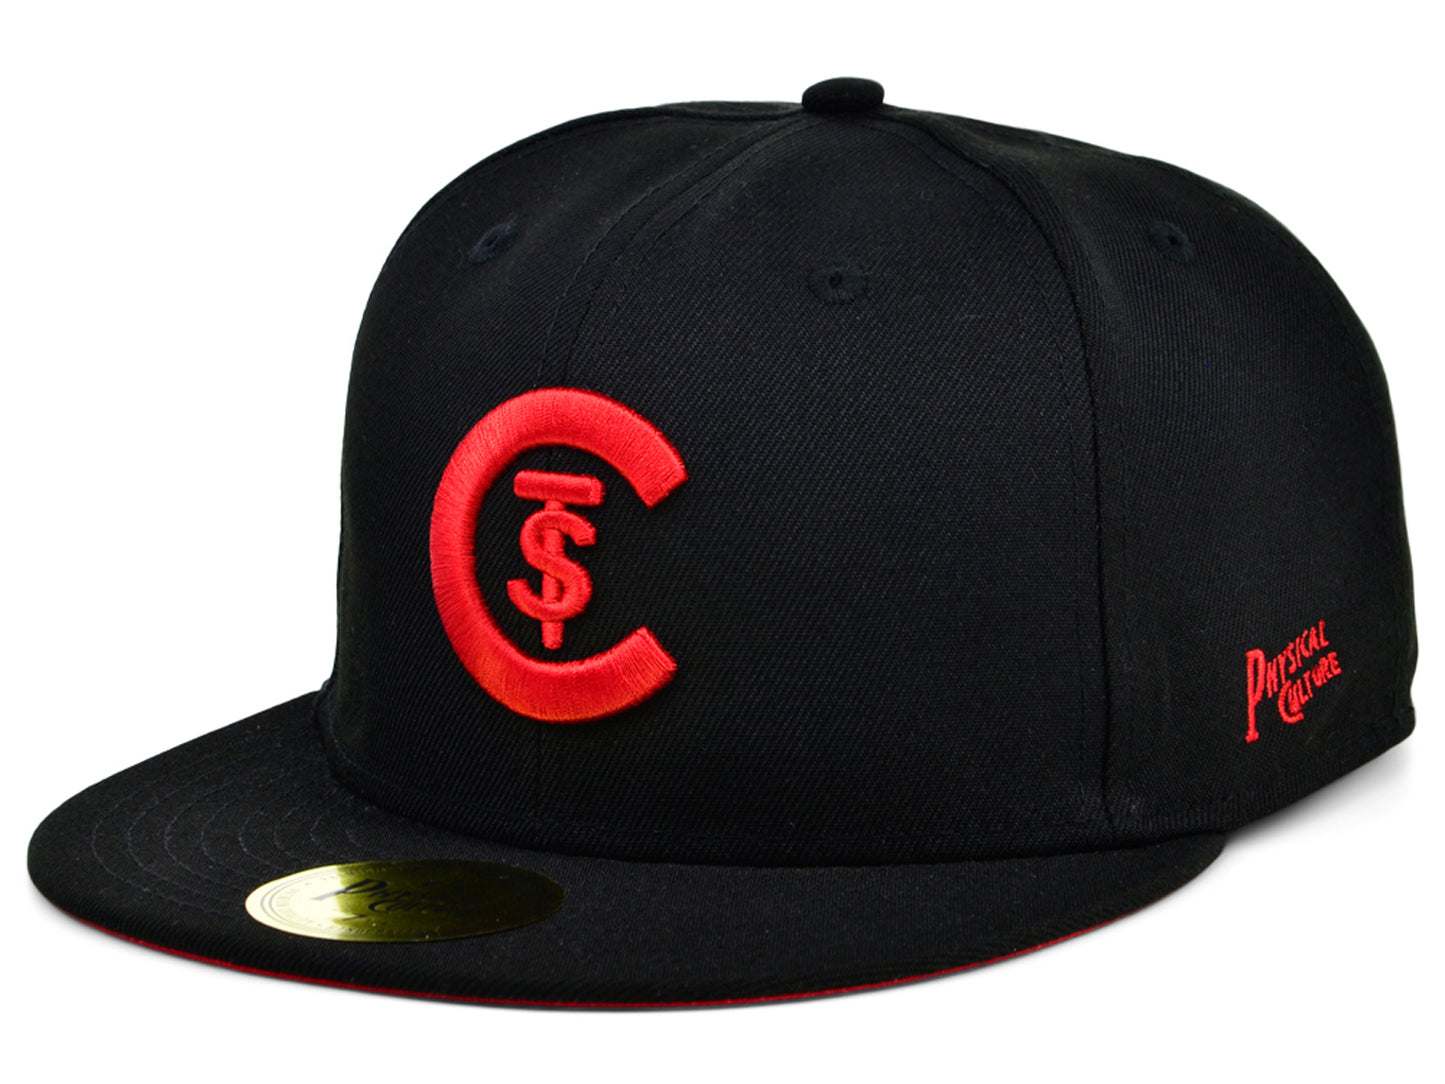 St. Christopher Club Fitted Cap